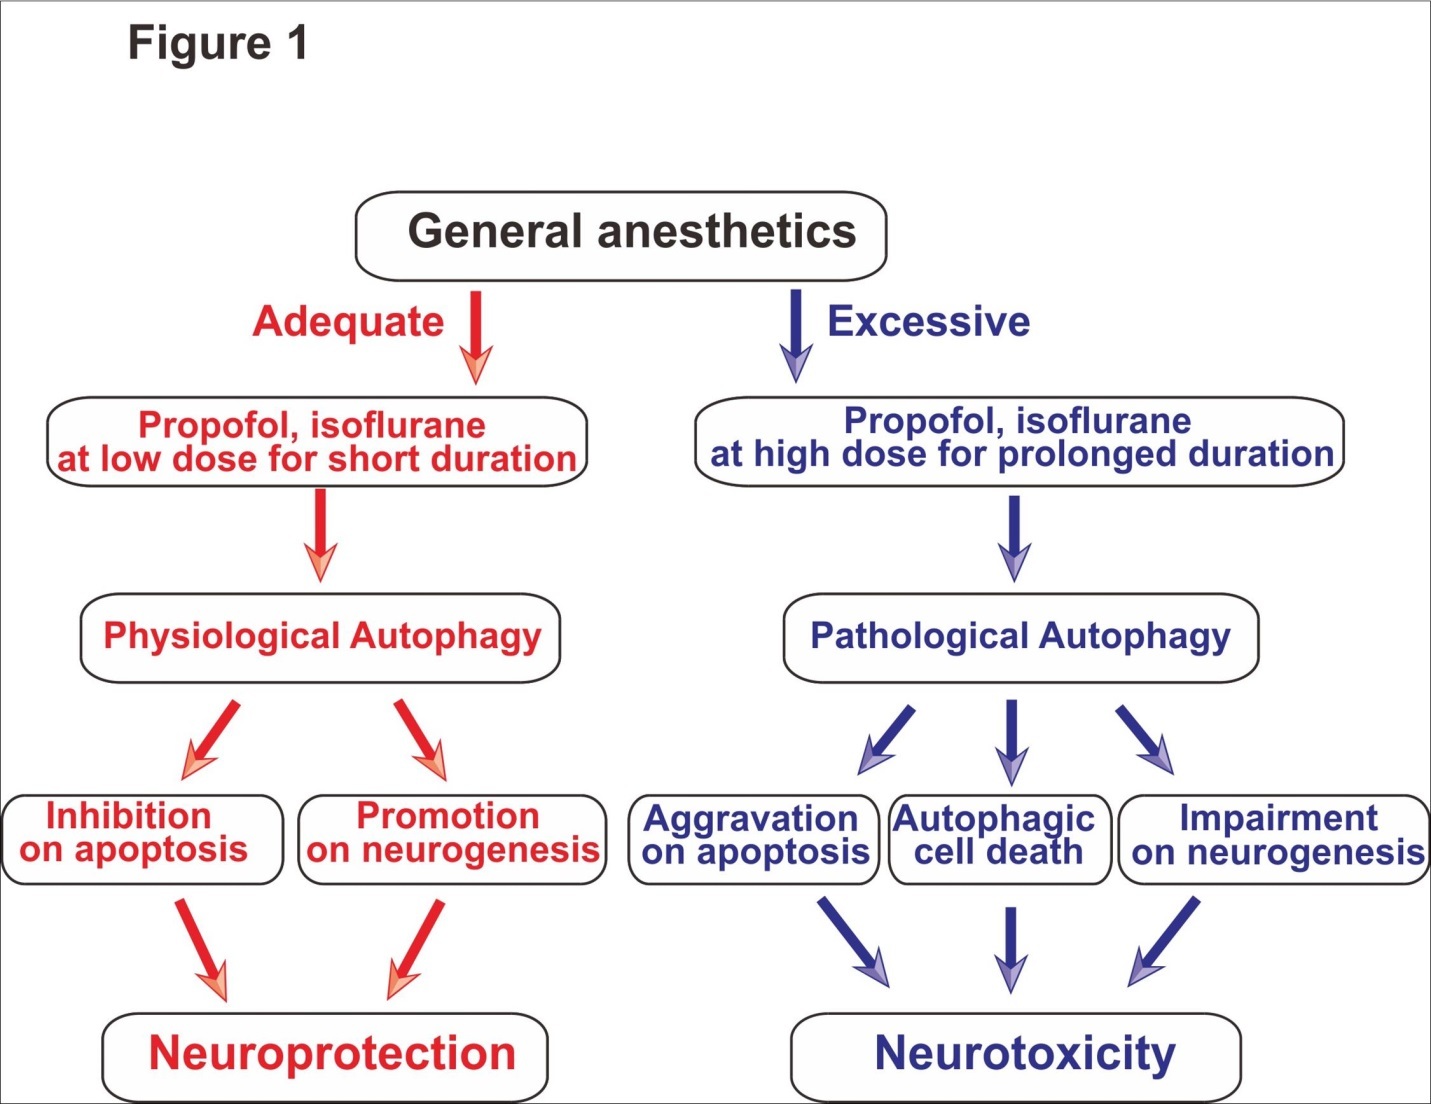  Role of autophagy in anesthetic mediated dual effects of neuroprotection and neurotoxicity. General anesthetics at low concentrations for short exposure induce physiological autophagy, which in turn inhibits apoptosis and promotes neurogenesis and eventually provides neuroprotection (left side). On the other hand, general anesthetics at high concentrations for prolonged use result in impairment of autophagy, which in turn promotes apoptosis and inhibits neurogenesis and eventually causes neurotoxicity (right side). 